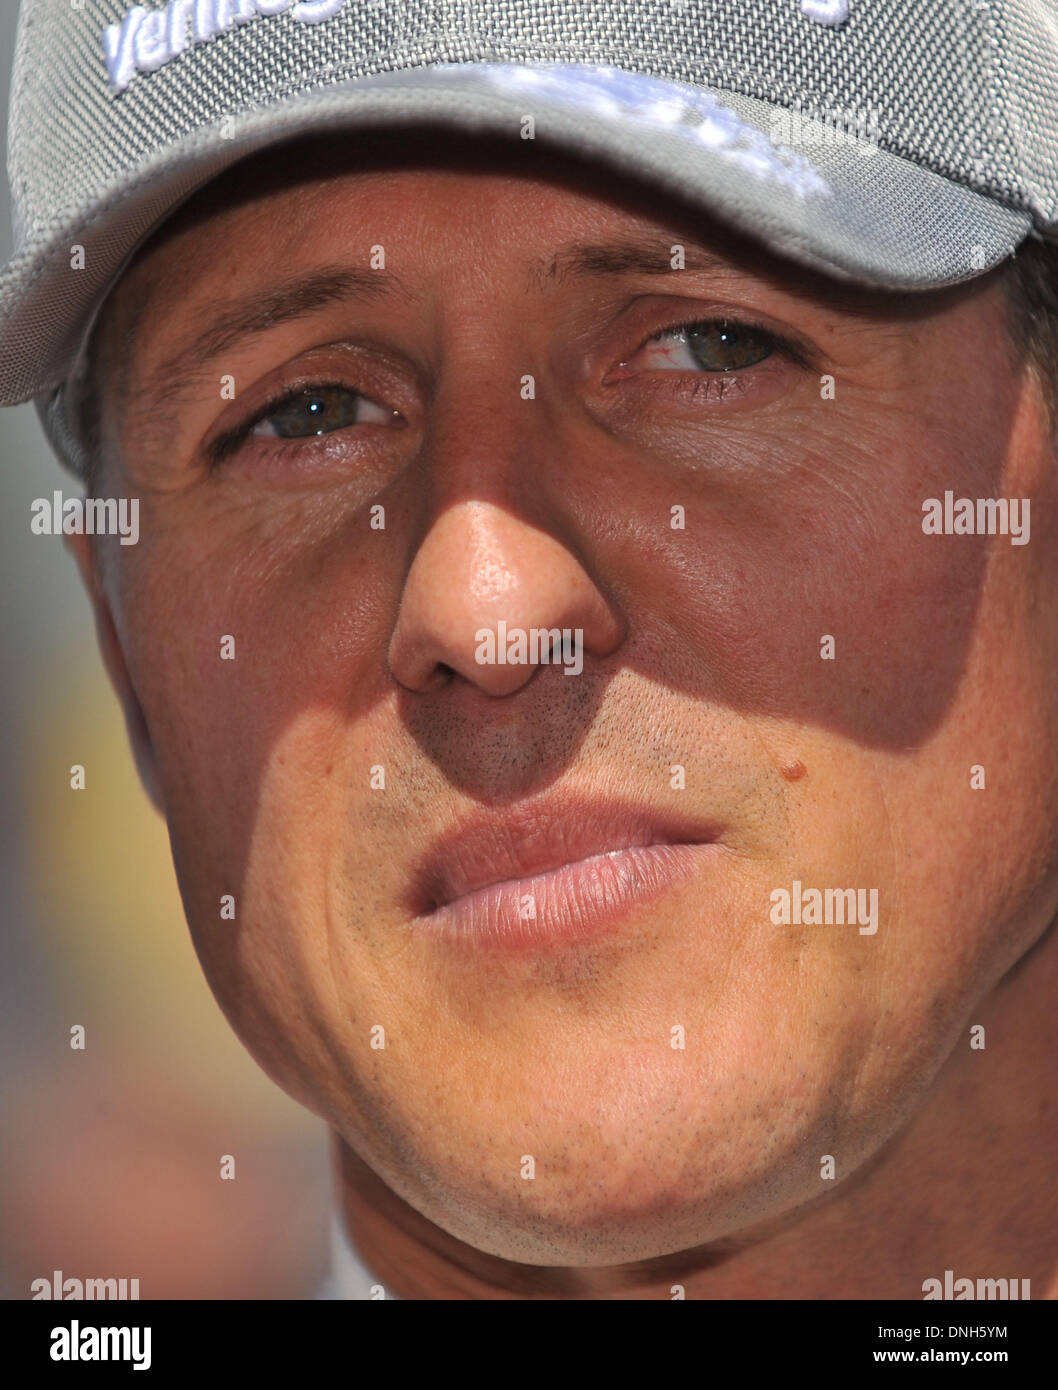 FILE: Monza, Italy. 11th Sep, 2010. German driver Michael Schumacher of Mercedes GP talks to journalists after the qualifying race for the 2010 Formula One Italian Grand Prix at the Autodromo Nazionale in Monza, Italy, 11 September 2010. The 2010 Formula One Italian Grand Prix is held on 12 September 2010. Photo: Peter Steffen/dpa/Alamy Live News Stock Photo